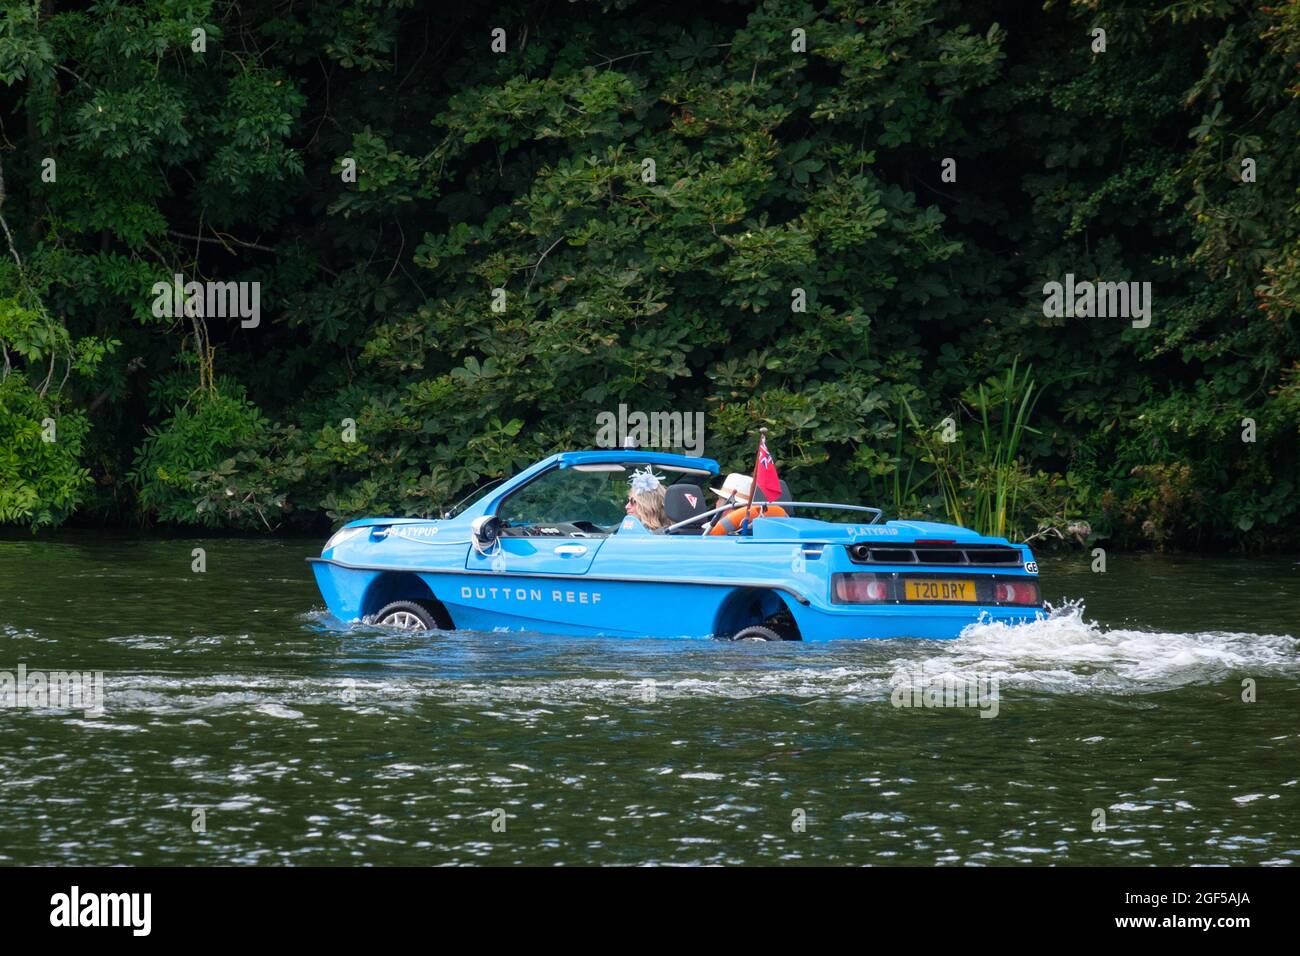 A Dutton Reef amphibious car in the river at Henley Royal Regatta 2021 on the River Thames Stock Photo